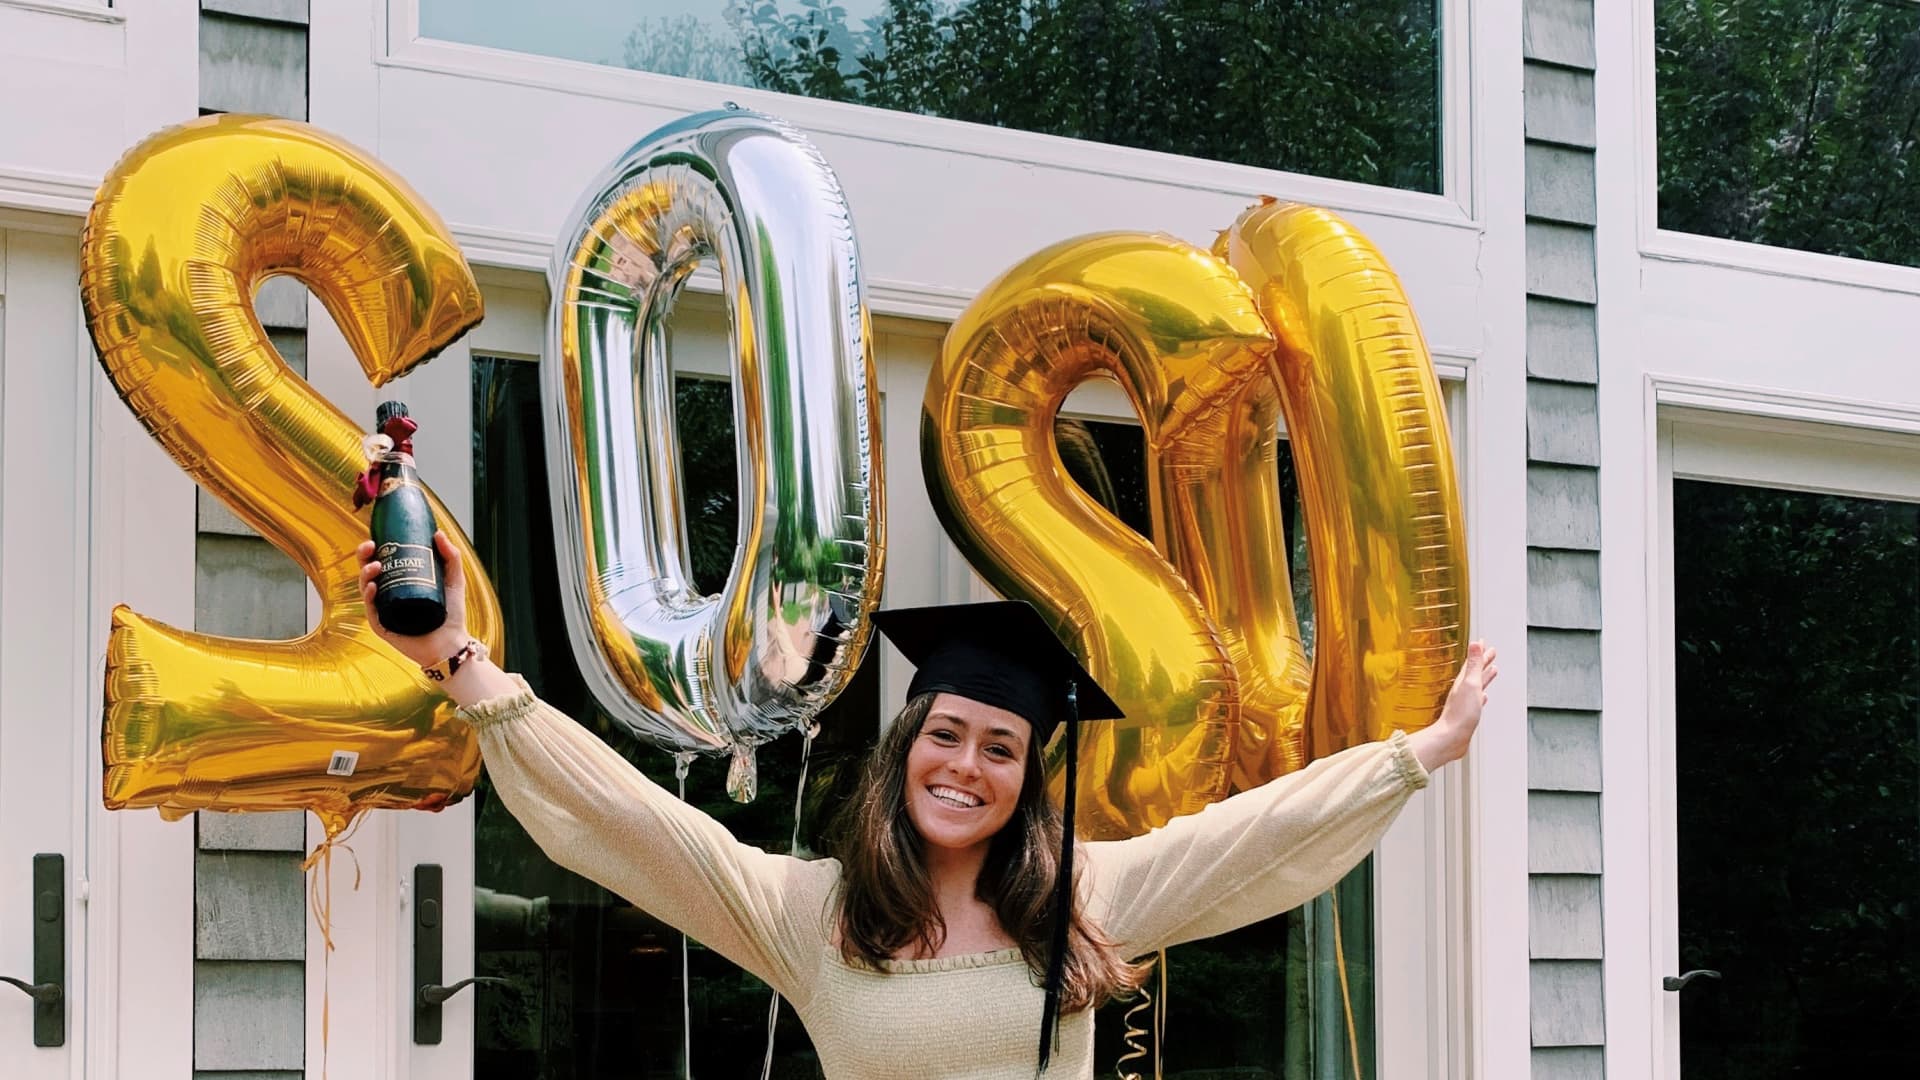 Emily McCarthy celebrated her college graduation at home with family and close friends after being sent home from Boston College in late March due to the coronavirus pandemic.